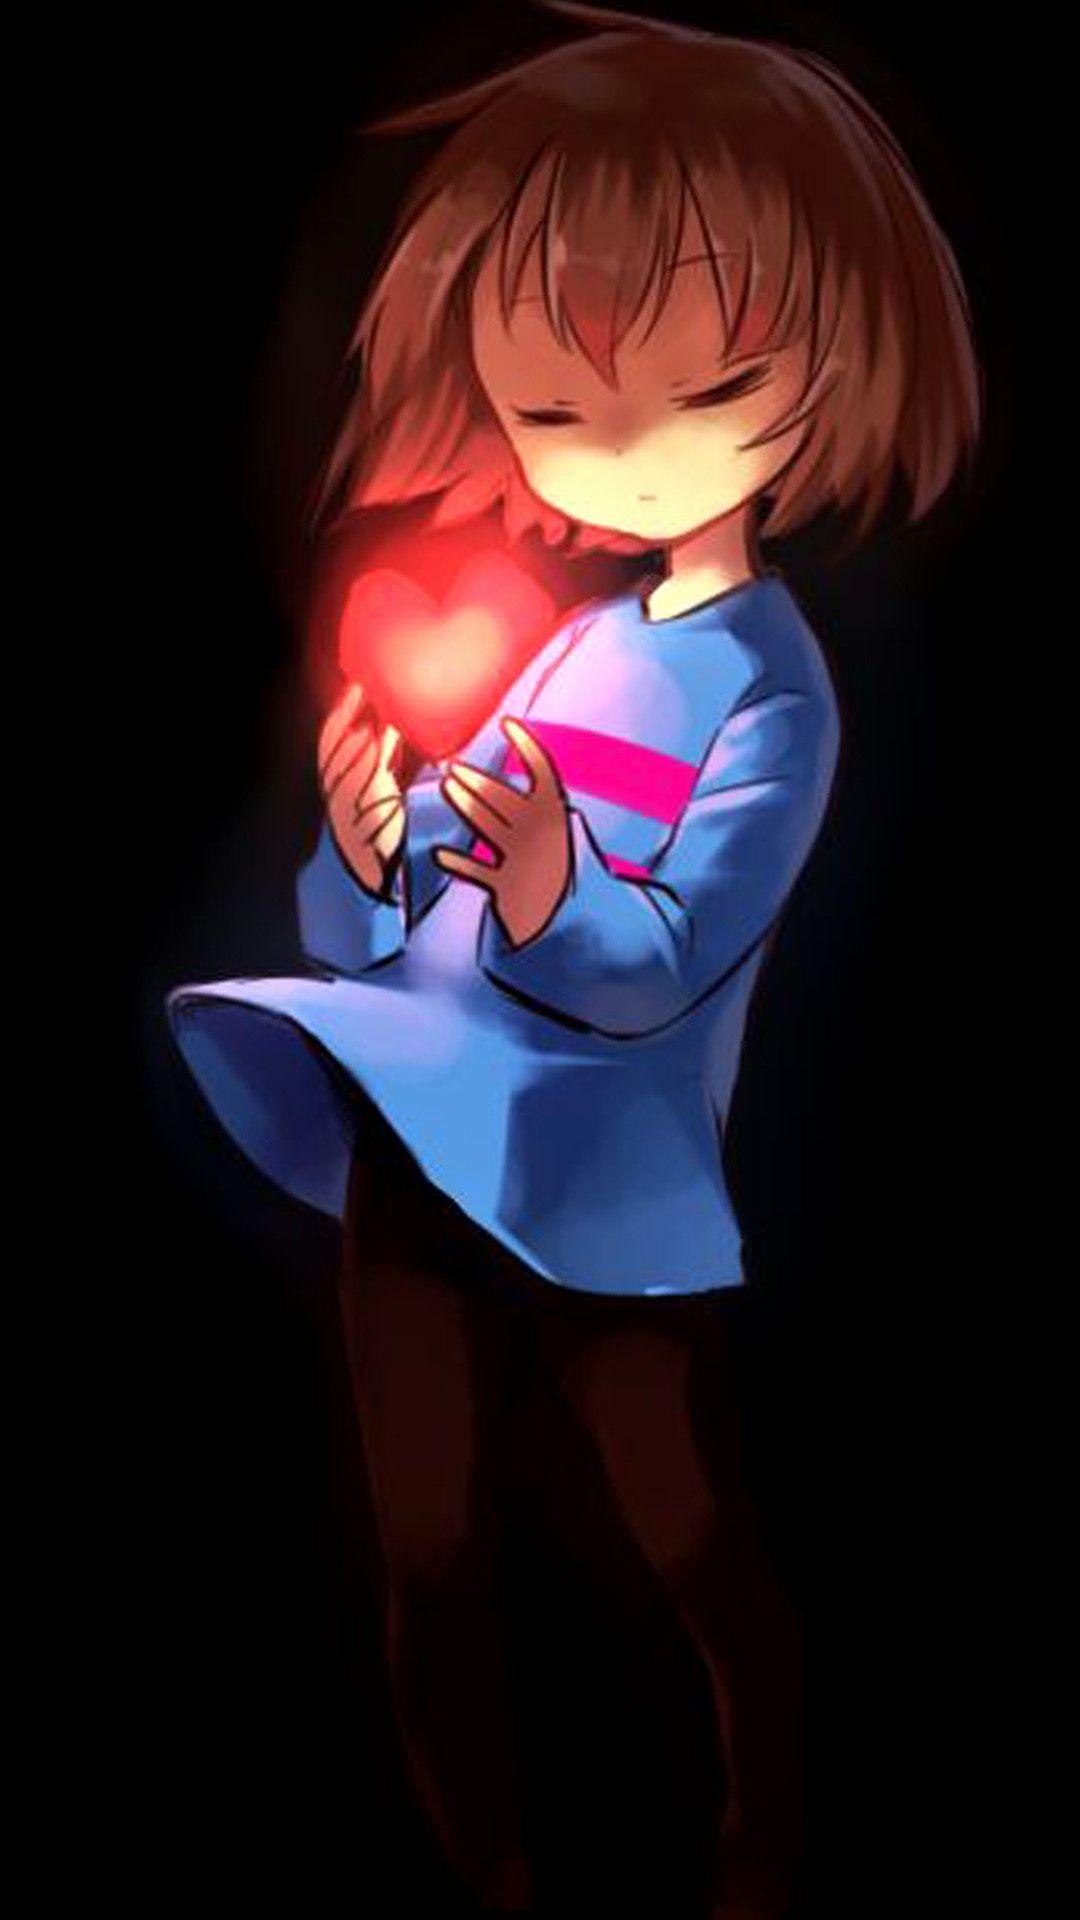 1080x1920 Flowey Wallpaper Awesome Undertale Frisk Wallpaper 74 Image This